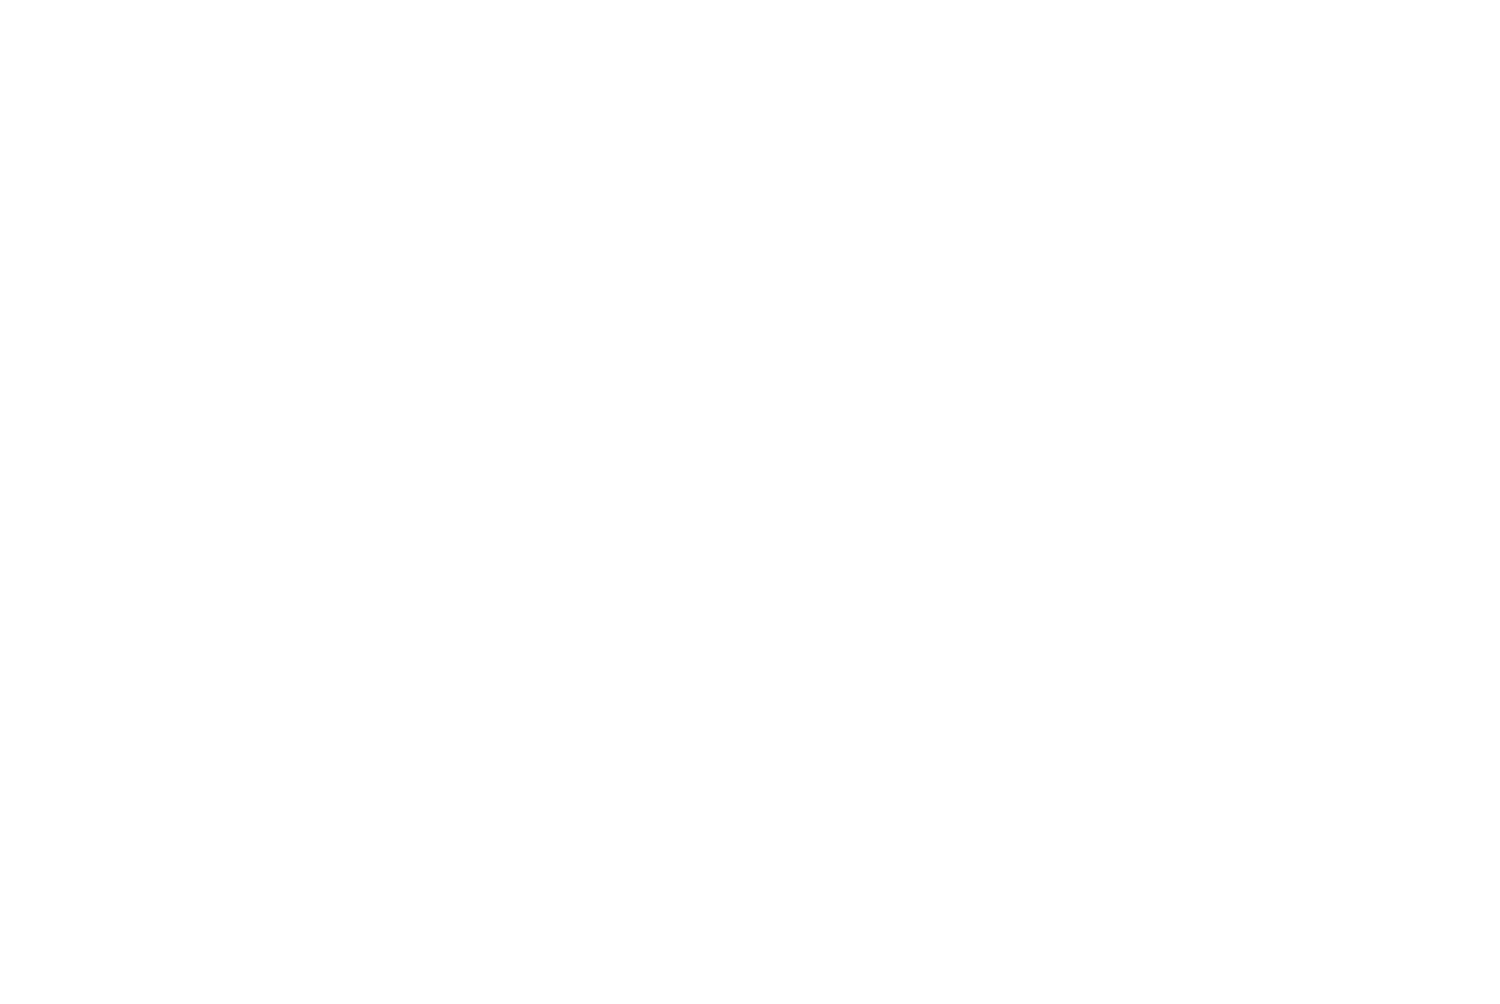 The Read Seed